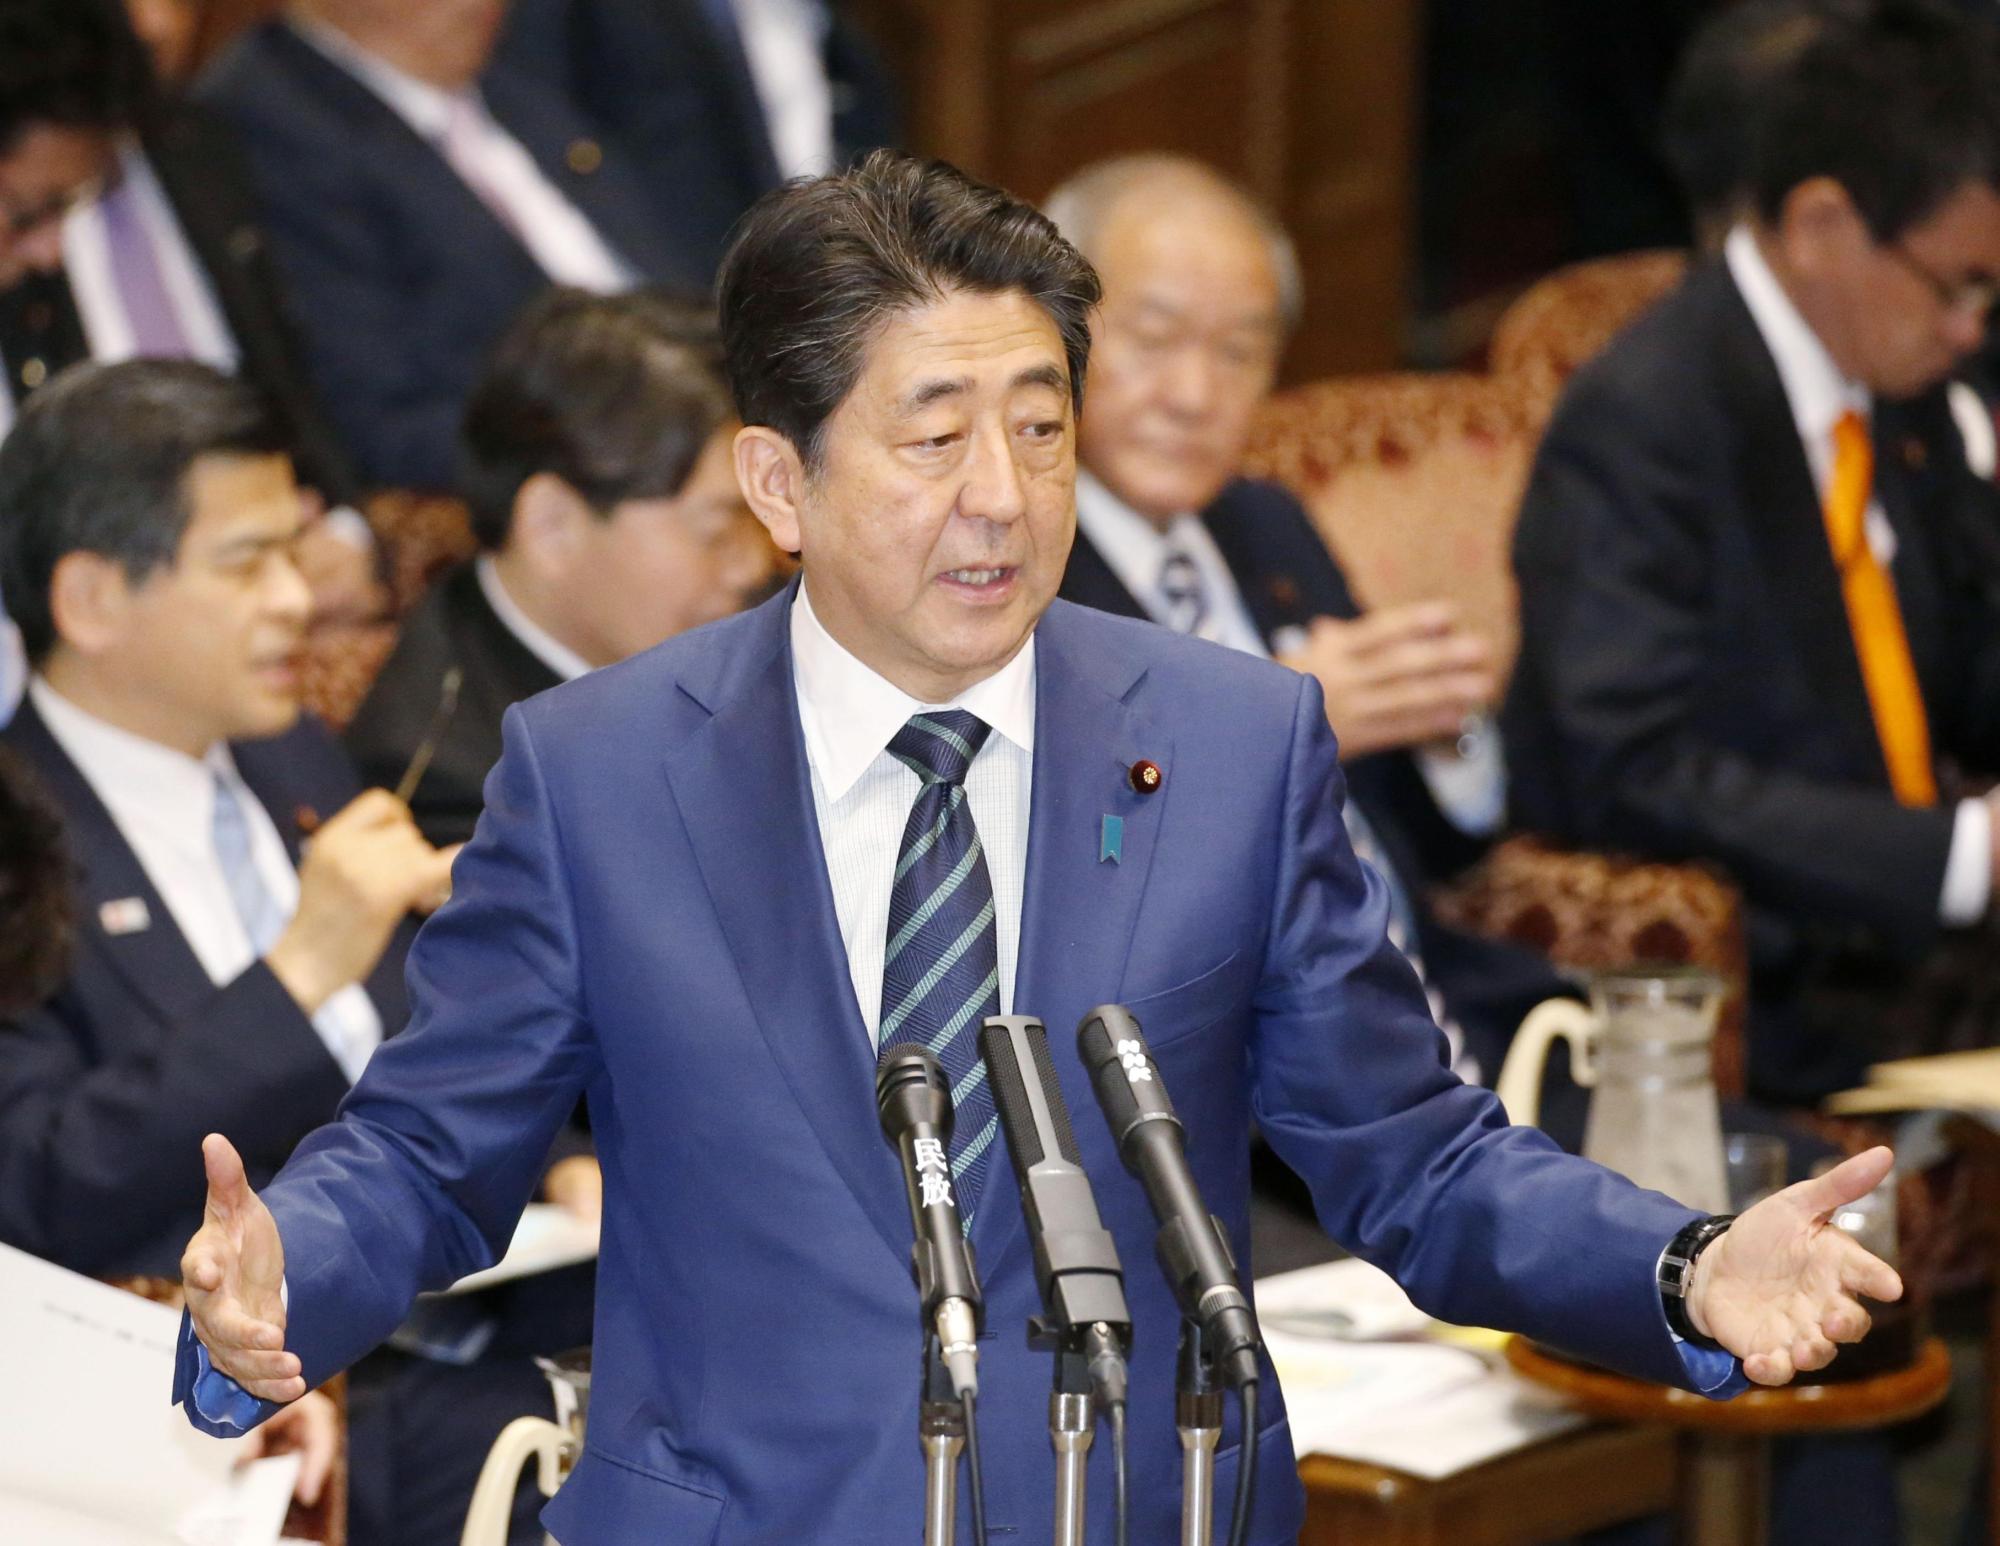 Prime Minister Shinzo Abe speaks at the  Upper House Budget Committee on March 1, where he promised the government would look again at the impact of the discretionary work system on people's work hours. | KYODO